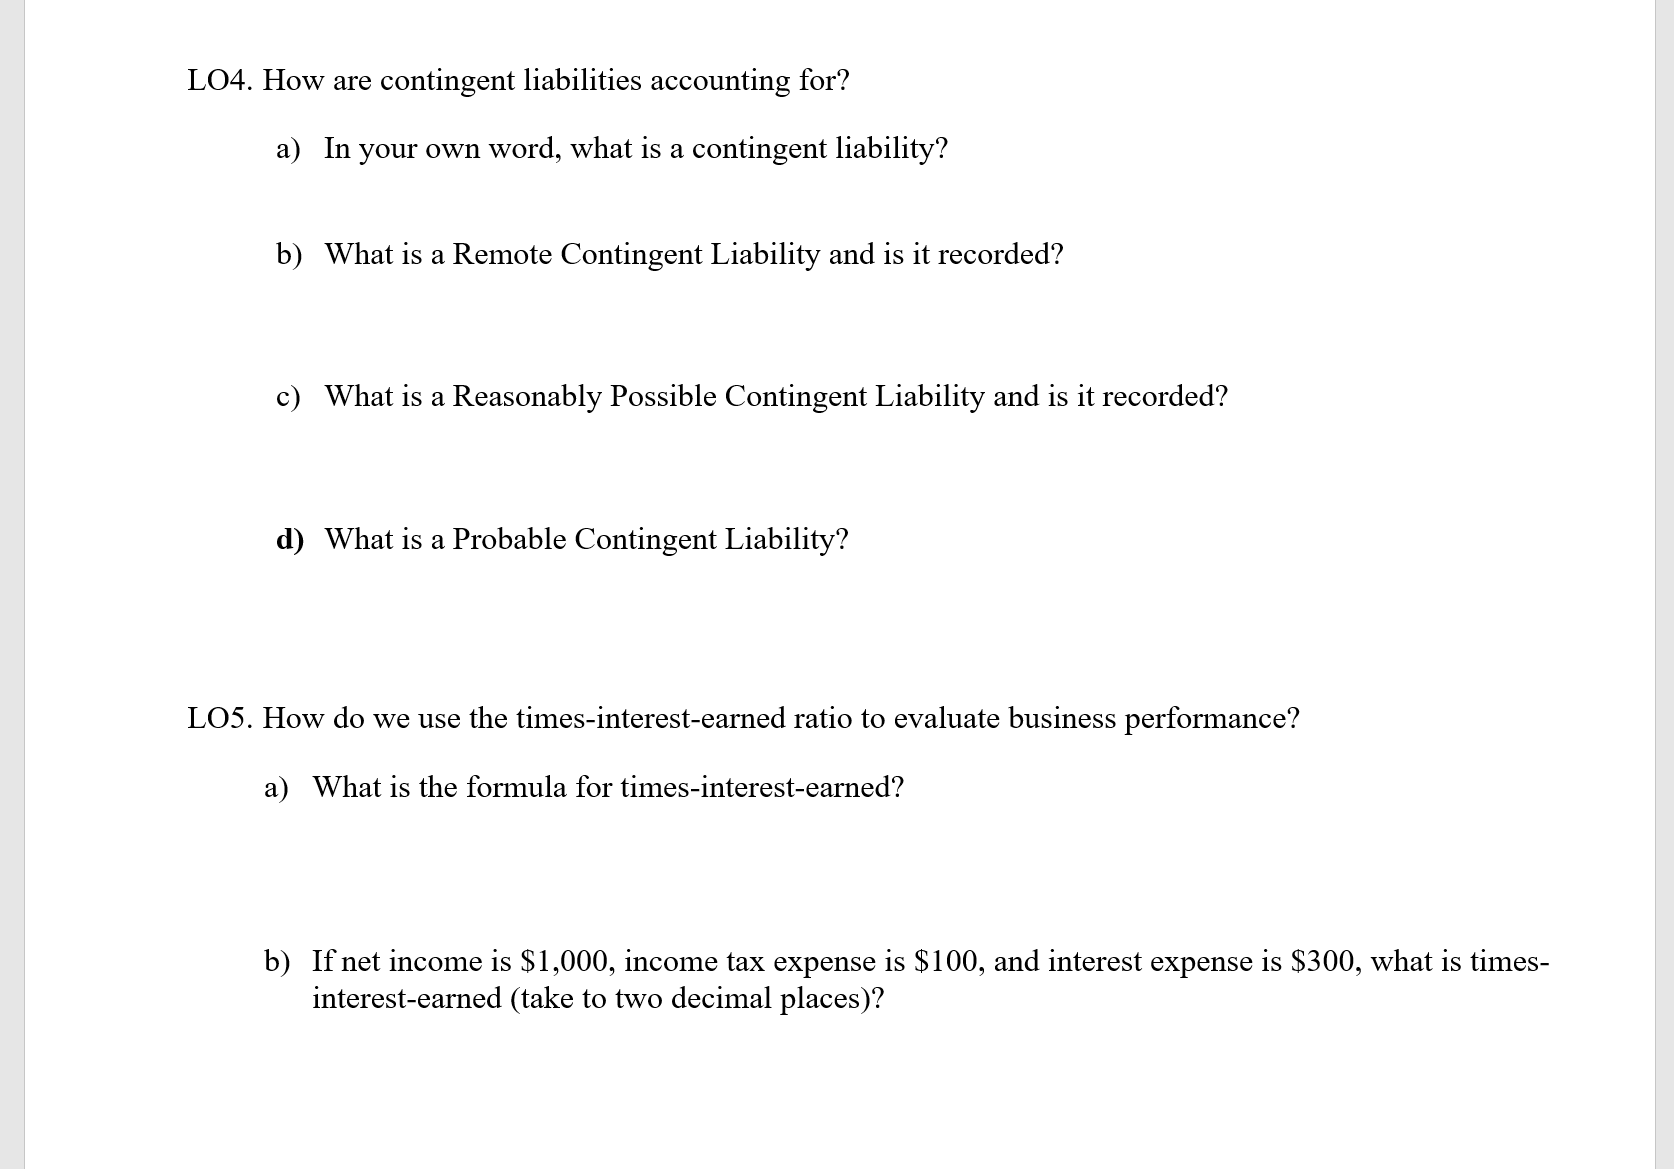 LO4. How are contingent liabilities accounting for?
a) In your own word, what is a contingent liability?
b) What is a Remote Contingent Liability and is it recorded?
c) What is a Reasonably Possible Contingent Liability and is it recorded?
d) What is a Probable Contingent Liability?
